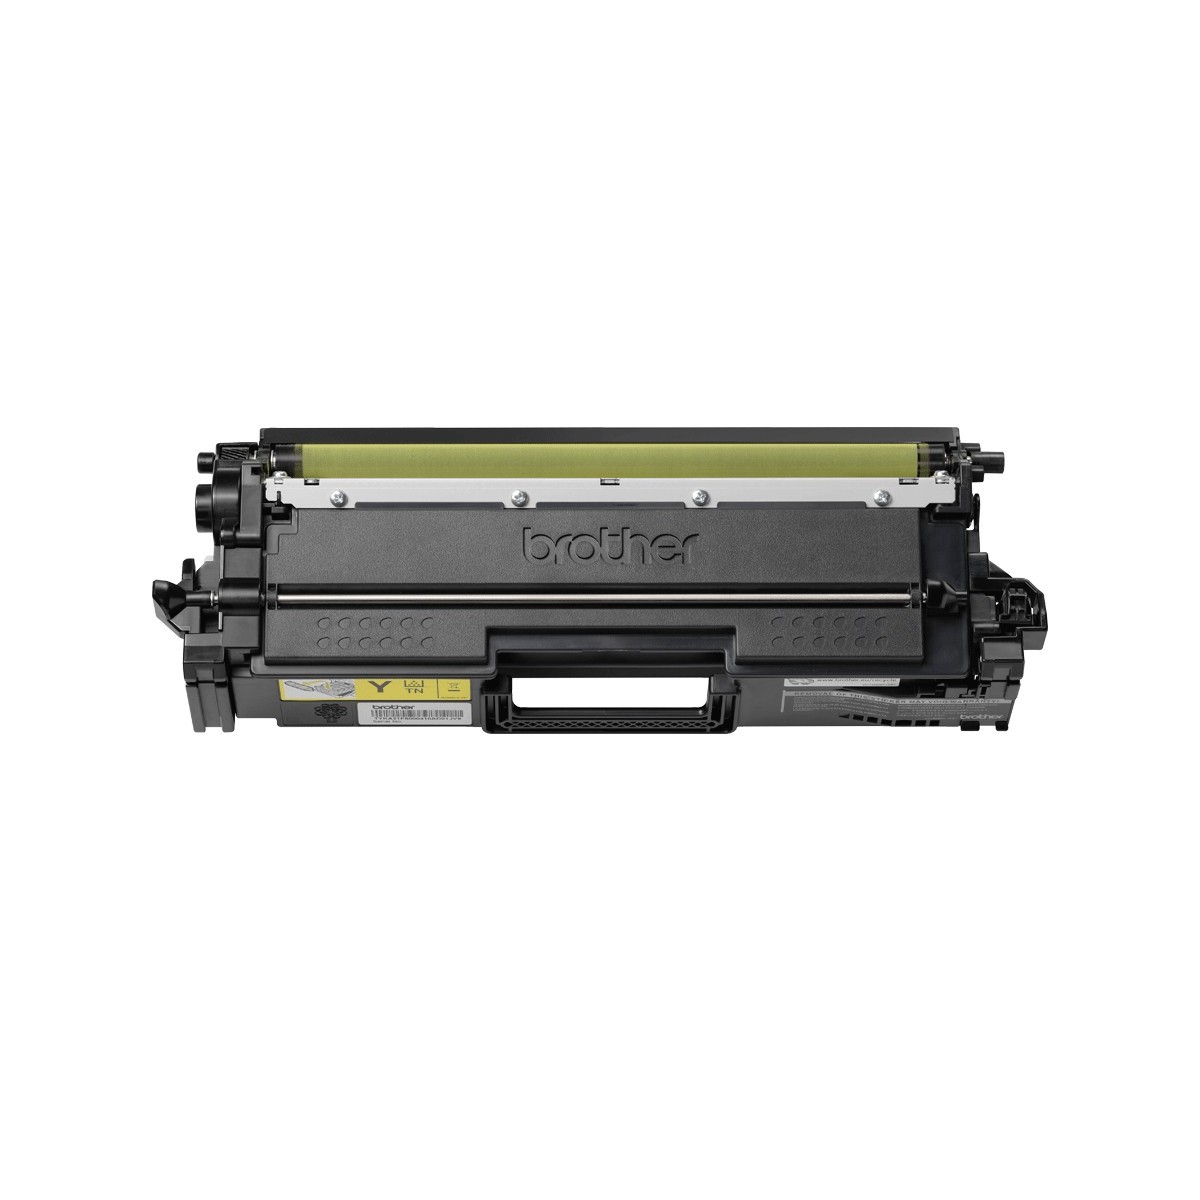 Brother TN-821XLY Super High Yield Yellow Toner Cartridge for EC Prints 9000 - Toner Cartridge - Yellow